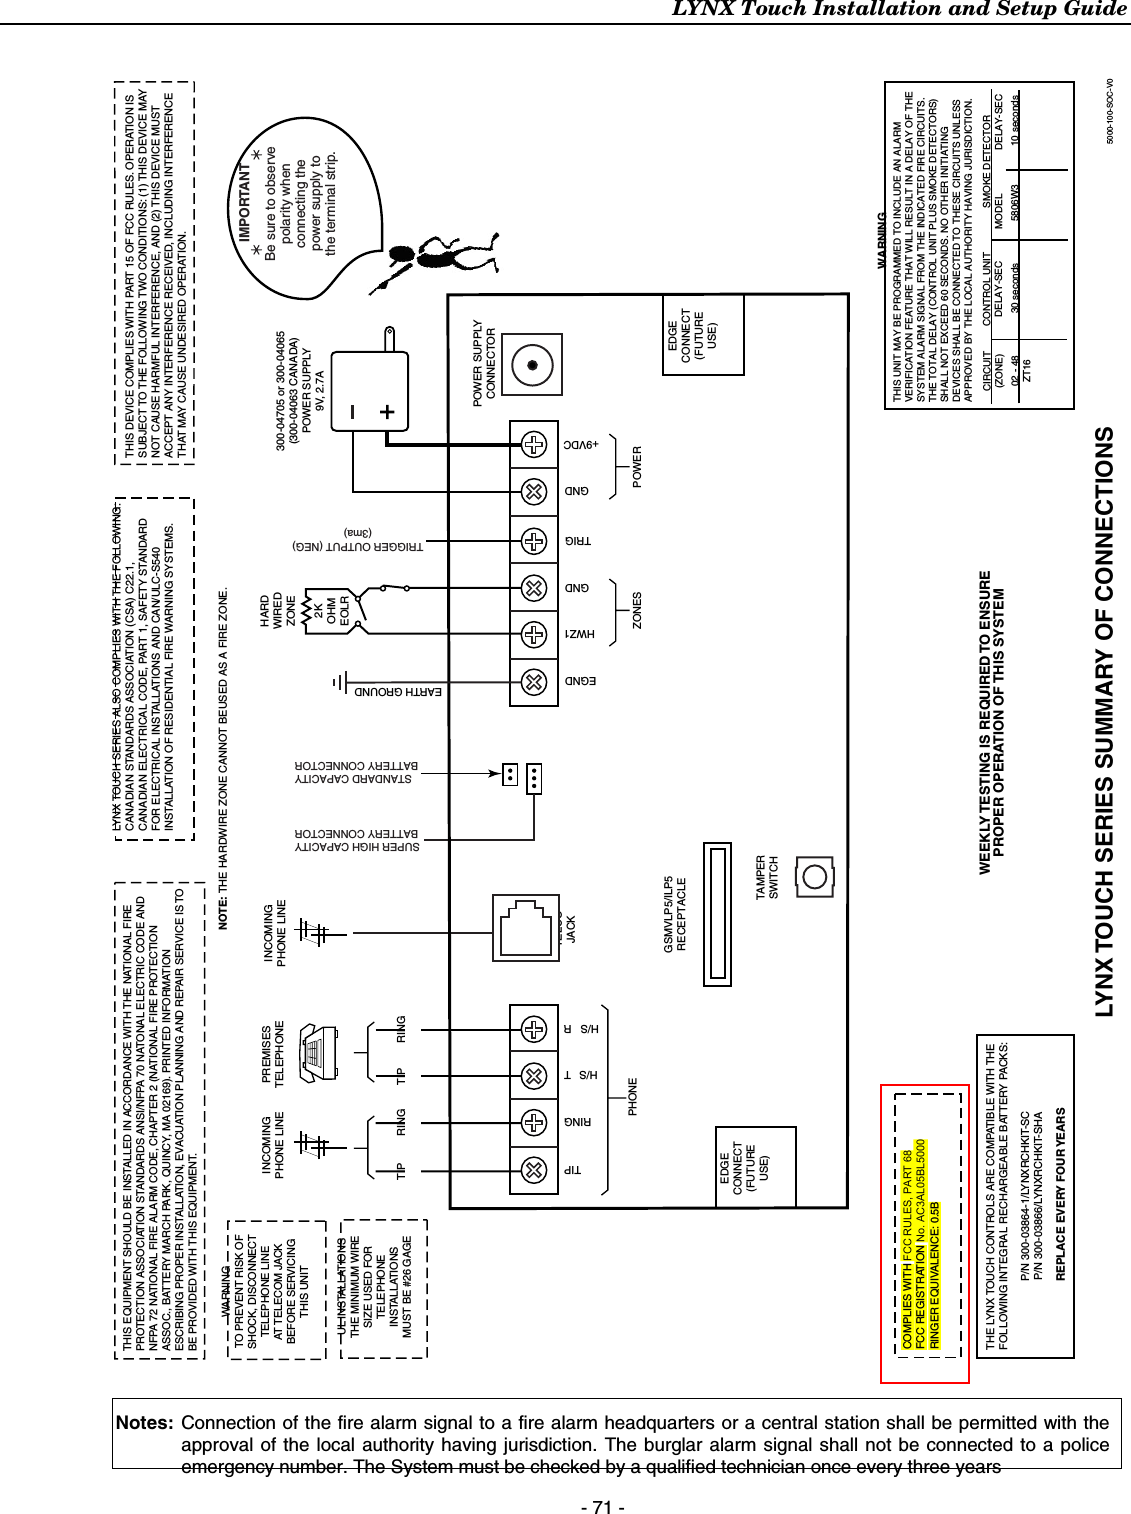 LYNX Touch Installation and Setup Guide    - 71 -  5000-100-SOC-V02KOHMEOLRPOWER SUPPLYCONNECTORHARDWIREDZONEWEEKLY TESTING IS REQUIRED TO ENSUREPROPER OPERATION OF THIS SYSTEMPREMISESTELEPHONEINCOMINGPHONE LINEINCOMINGPHONE LINEH/S   TH/S   RRINGTIPEGNDEARTH GROUNDHWZ1TRIGGNDGND+9VDC300-04705 or 300-04065(300-04063 CANADA)POWER SUPPLY9V, 2.7ASTANDARD CAPACITYBATTERY CONNECTORSUPER HIGH CAPACITYBATTERY CONNECTORLYNX TOUCH SERIES SUMMARY OF CONNECTIONSZONES POWERPHONETRIGGER OUTPUT (NEG)(3ma)THIS DEVICE COMPLIES WITH PART 15 OF FCC RULES. OPERATION ISSUBJECT TO THE FOLLOWING TWO CONDITIONS: (1) THIS DEVICE MAYNOT CAUSE HARMFUL INTERFERENCE, AND (2) THIS DEVICE MUSTACCEPT ANY INTERFERENCE RECEIVED, INCLUDING INTERFERENCETHAT MAY CAUSE UNDESIRED OPERATION.THIS EQUIPMENT SHOULD BE INSTALLED IN ACCORDANCE WITH THE NATIONAL FIREPROTECTION ASSOCIATION STANDARDS ANSI/NFPA 70 NATONAL ELECTRIC CODE ANDNFPA 72 NATIONAL FIRE ALARM CODE, CHAPTER 2 (NATIONAL FIRE PROTECTIONASSOC., BATTERY MARCH PARK, QUINCY, MA 02169). PRINTED INFORMATION ESCRIBING PROPER INSTALLATION, EVACUATION PLANNING AND REPAIR SERVICE IS TOBE PROVIDED WITH THIS EQUIPMENT.THE LYNX TOUCH CONTROLS ARE COMPATIBLE WITH THEFOLLOWING INTEGRAL RECHARGEABLE BATTERY PACKS:REPLACE EVERY FOUR YEARSP/N 300-03864-1/LYNXRCHKIT-SCP/N 300-03866/LYNXRCHKIT-SHACOMPLIES WITH FCC RULES, PART 68 FCC REGISTRATION No. AC3AL05BL5000RINGER EQUIVALENCE: 0.5BRINGTIP RING TIPTAMPERSWITCHTELCOJACKEDGECONNECT(FUTUREUSE)EDGECONNECT(FUTUREUSE)GSMVLP5/ILP5RECEPTACLENOTE: THE HARDWIRE ZONE CANNOT BEUSED AS A FIRE ZONE.UL INSTALLATIONSTHE MINIMUM WIRESIZE USED FORTELEPHONEINSTALLATIONSMUST BE #26 GAGEWARNINGTO PREVENT RISK OFSHOCK, DISCONNECTTELEPHONE LINEAT TELECOM JACKBEFORE SERVICINGTHIS UNITLYNX TOUCH SERIES ALSO COMPLIES WITH THE FOLLOWING:CANADIAN STANDARDS ASSOCIATION (CSA) C22.1,CANADIAN ELECTRICAL CODE, PART 1, SAFETY STANDARDFOR ELECTRICAL INSTALLATIONS AND CAN/ULC-S540INSTALLATION OF RESIDENTIAL FIRE WARNING SYSTEMS.CIRCUIT(ZONE)CONTROL UNITDELAY-SECSMOKE DETECTORMODEL                DELAY-SECTHIS UNIT MAY BE PROGRAMMED TO INCLUDE AN ALARMVERIFICATION FEATURE THAT WILL RESULT IN A DELAY OF THESYSTEM ALARM SIGNAL FROM THE INDICATED FIRE CIRCUITS.THE TOTAL DELAY (CONTROL UNIT PLUS SMOKE DETECTORS)SHALL NOT EXCEED 60 SECONDS. NO OTHER INITIATINGDEVICES SHALL BE CONNECTED TO THESE CIRCUITS UNLESSAPPROVED BY THE LOCAL AUTHORITY HAVING JURISDICTION.WARNING5806W3 10 seconds30 seconds02 - 48ZT16Be sure to observepolarity whenconnecting thepower supply tothe terminal strip.IMPORTANT Notes: Connection of the fire alarm signal to a fire alarm headquarters or a central station shall be permitted with the approval of the local authority having jurisdiction. The burglar alarm signal shall not be connected to a police emergency number. The System must be checked by a qualified technician once every three years 